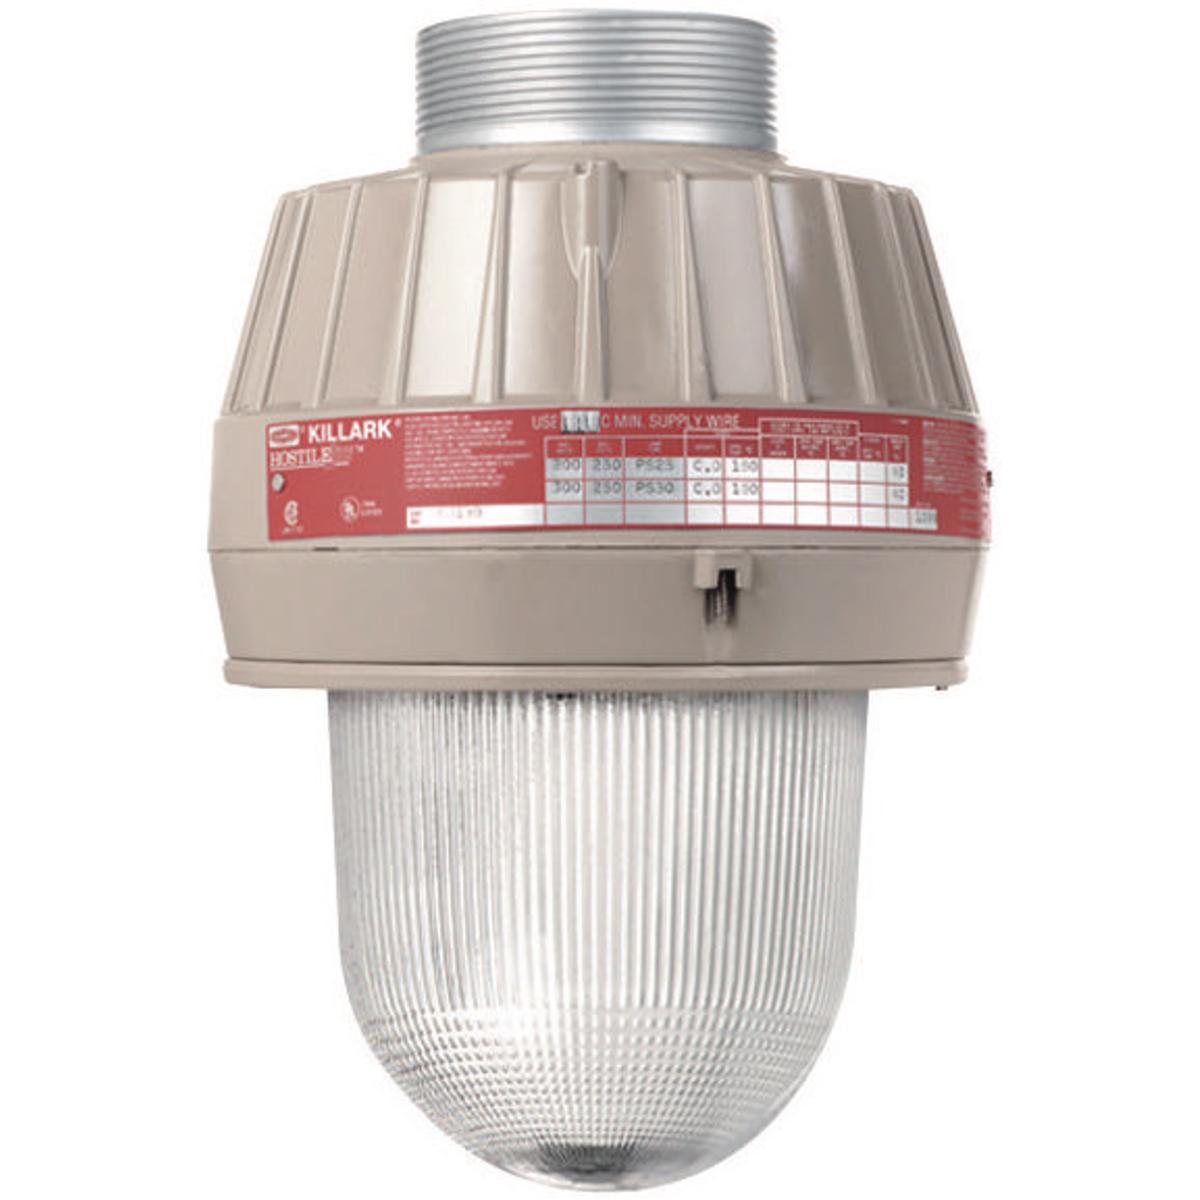 Hubbell EMI20 EMI Series - Aluminum 200 Watt Incandescent Light Fixture - 250VAC Max  ; Four light sources—Incandescent, compact fluorescent, high pressure sodium and metal halide ; Mounting choice—Pendant, ceiling, 25˚ stanchion or 90˚ wall mount, all with “wireless” 